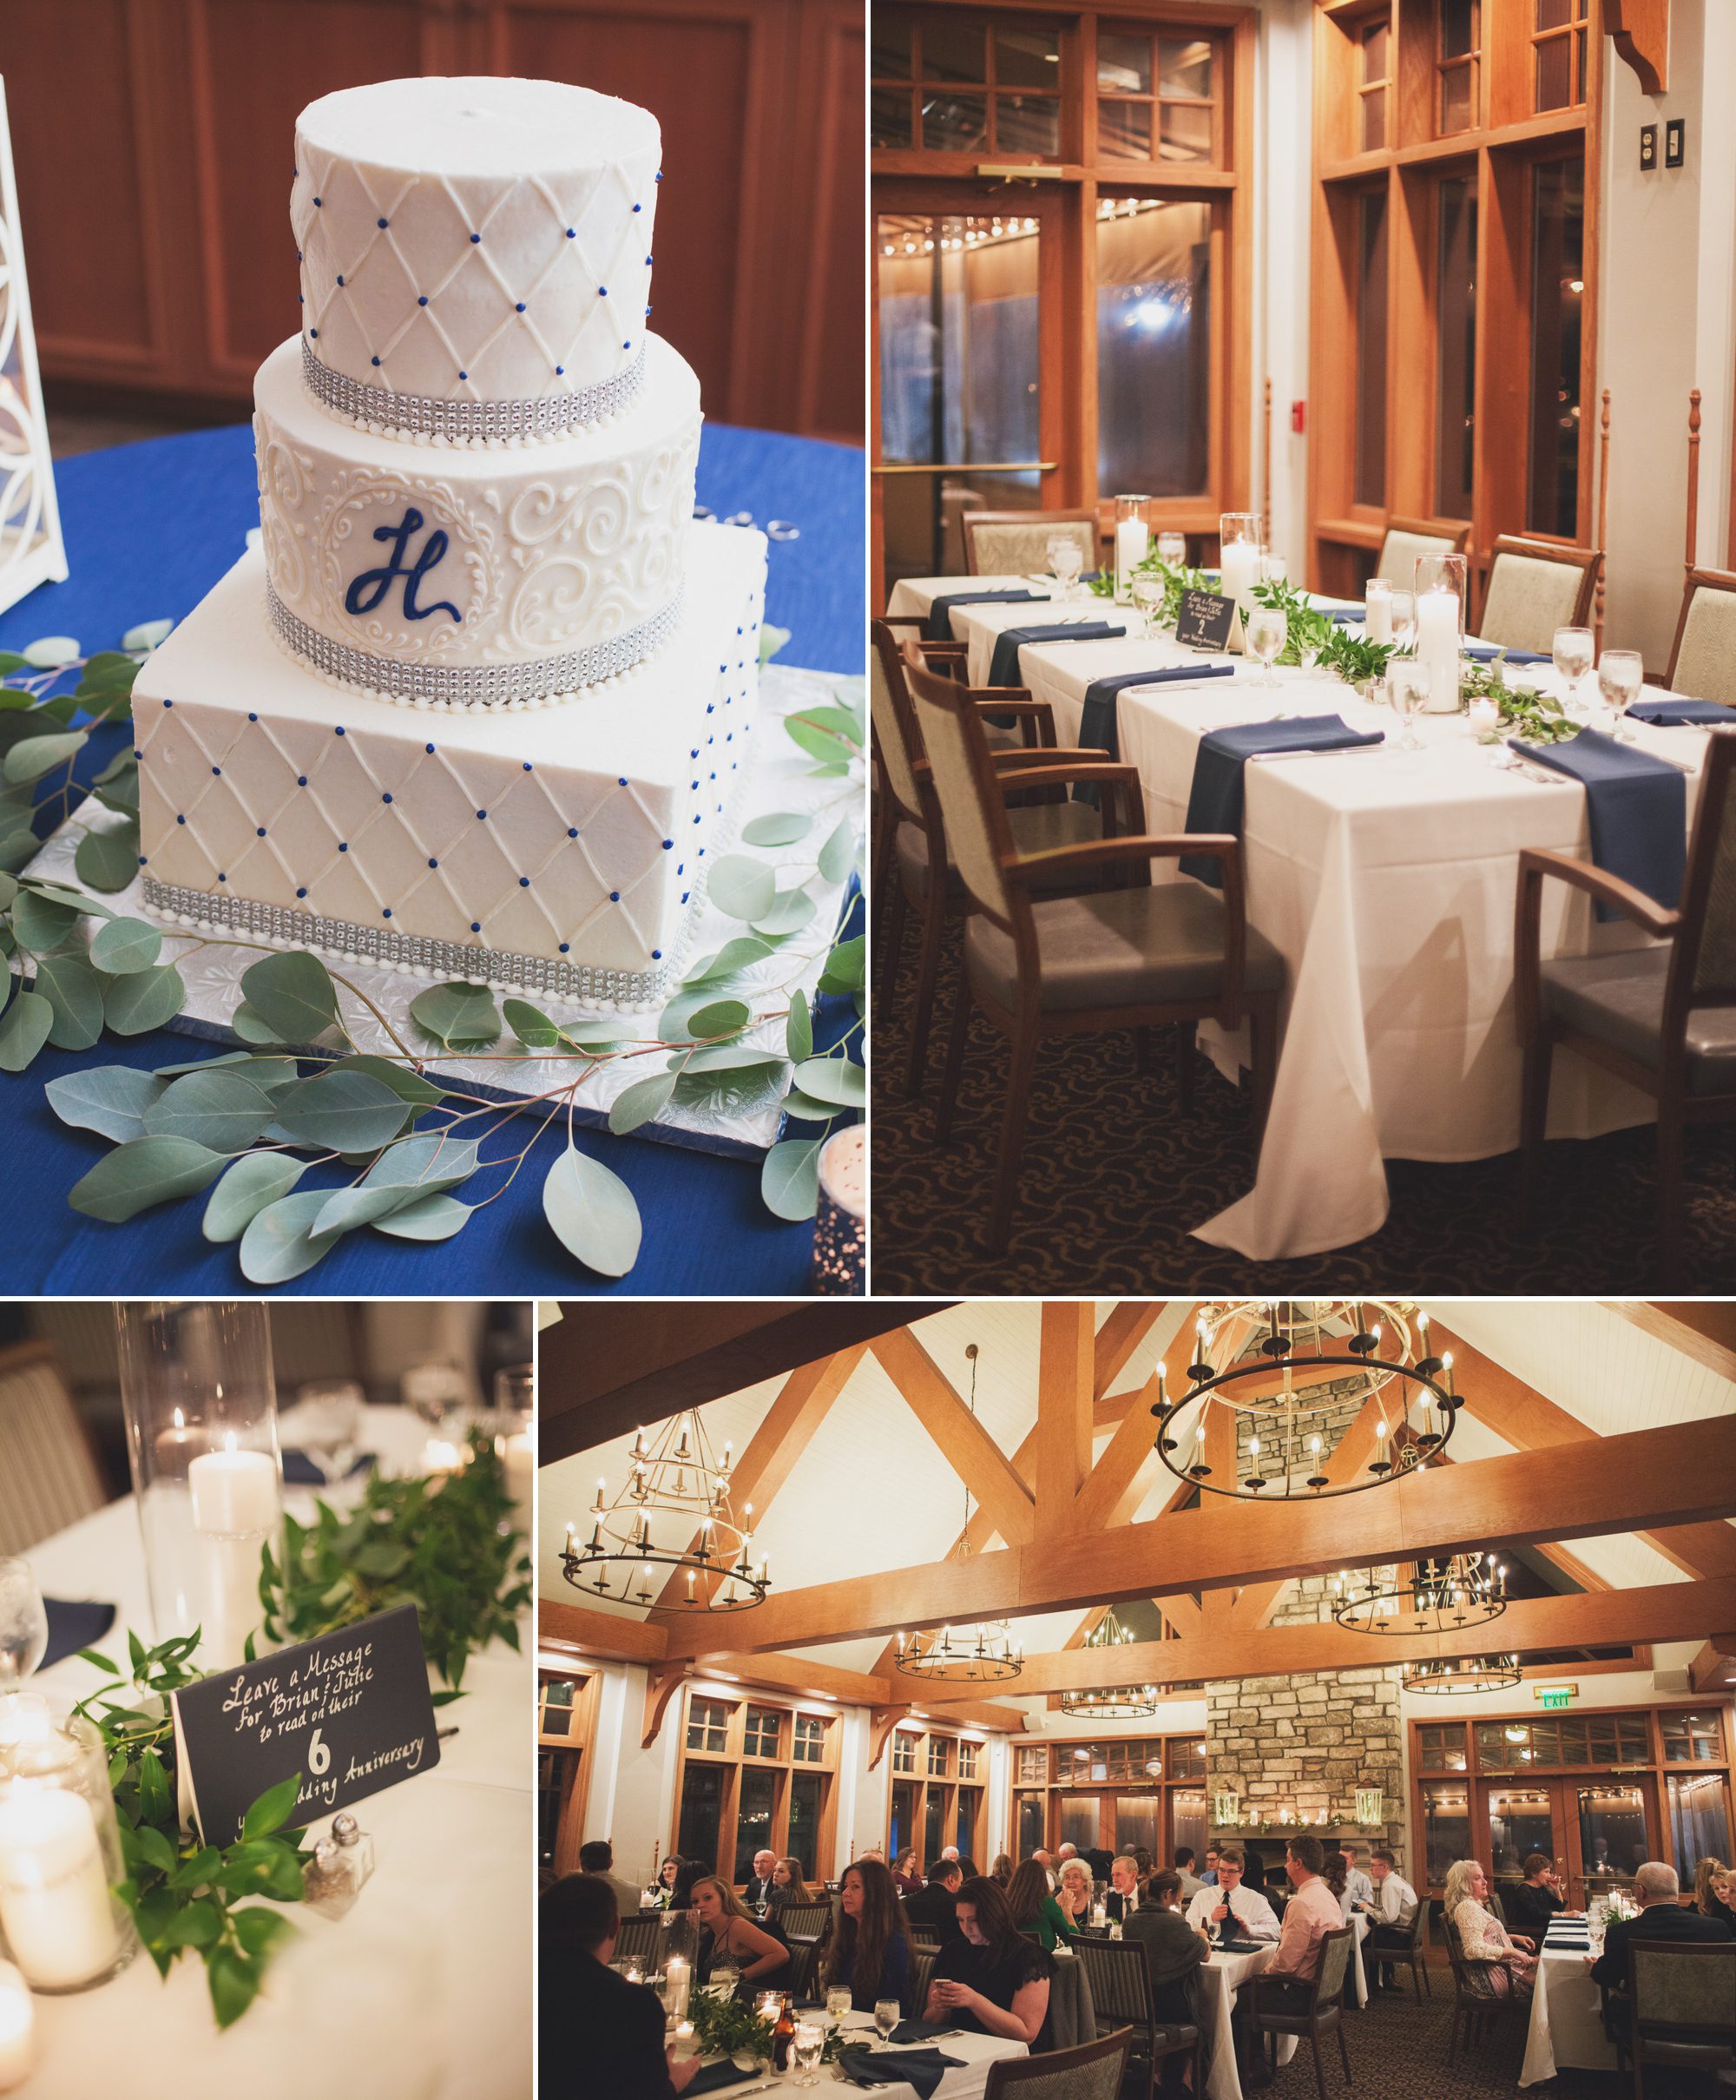 Beautiful wedding reception details in clubhouse. Winter wedding at Vanderbilt Legends Golf Course in Brentwood TN, photos by Krista Lee Photography